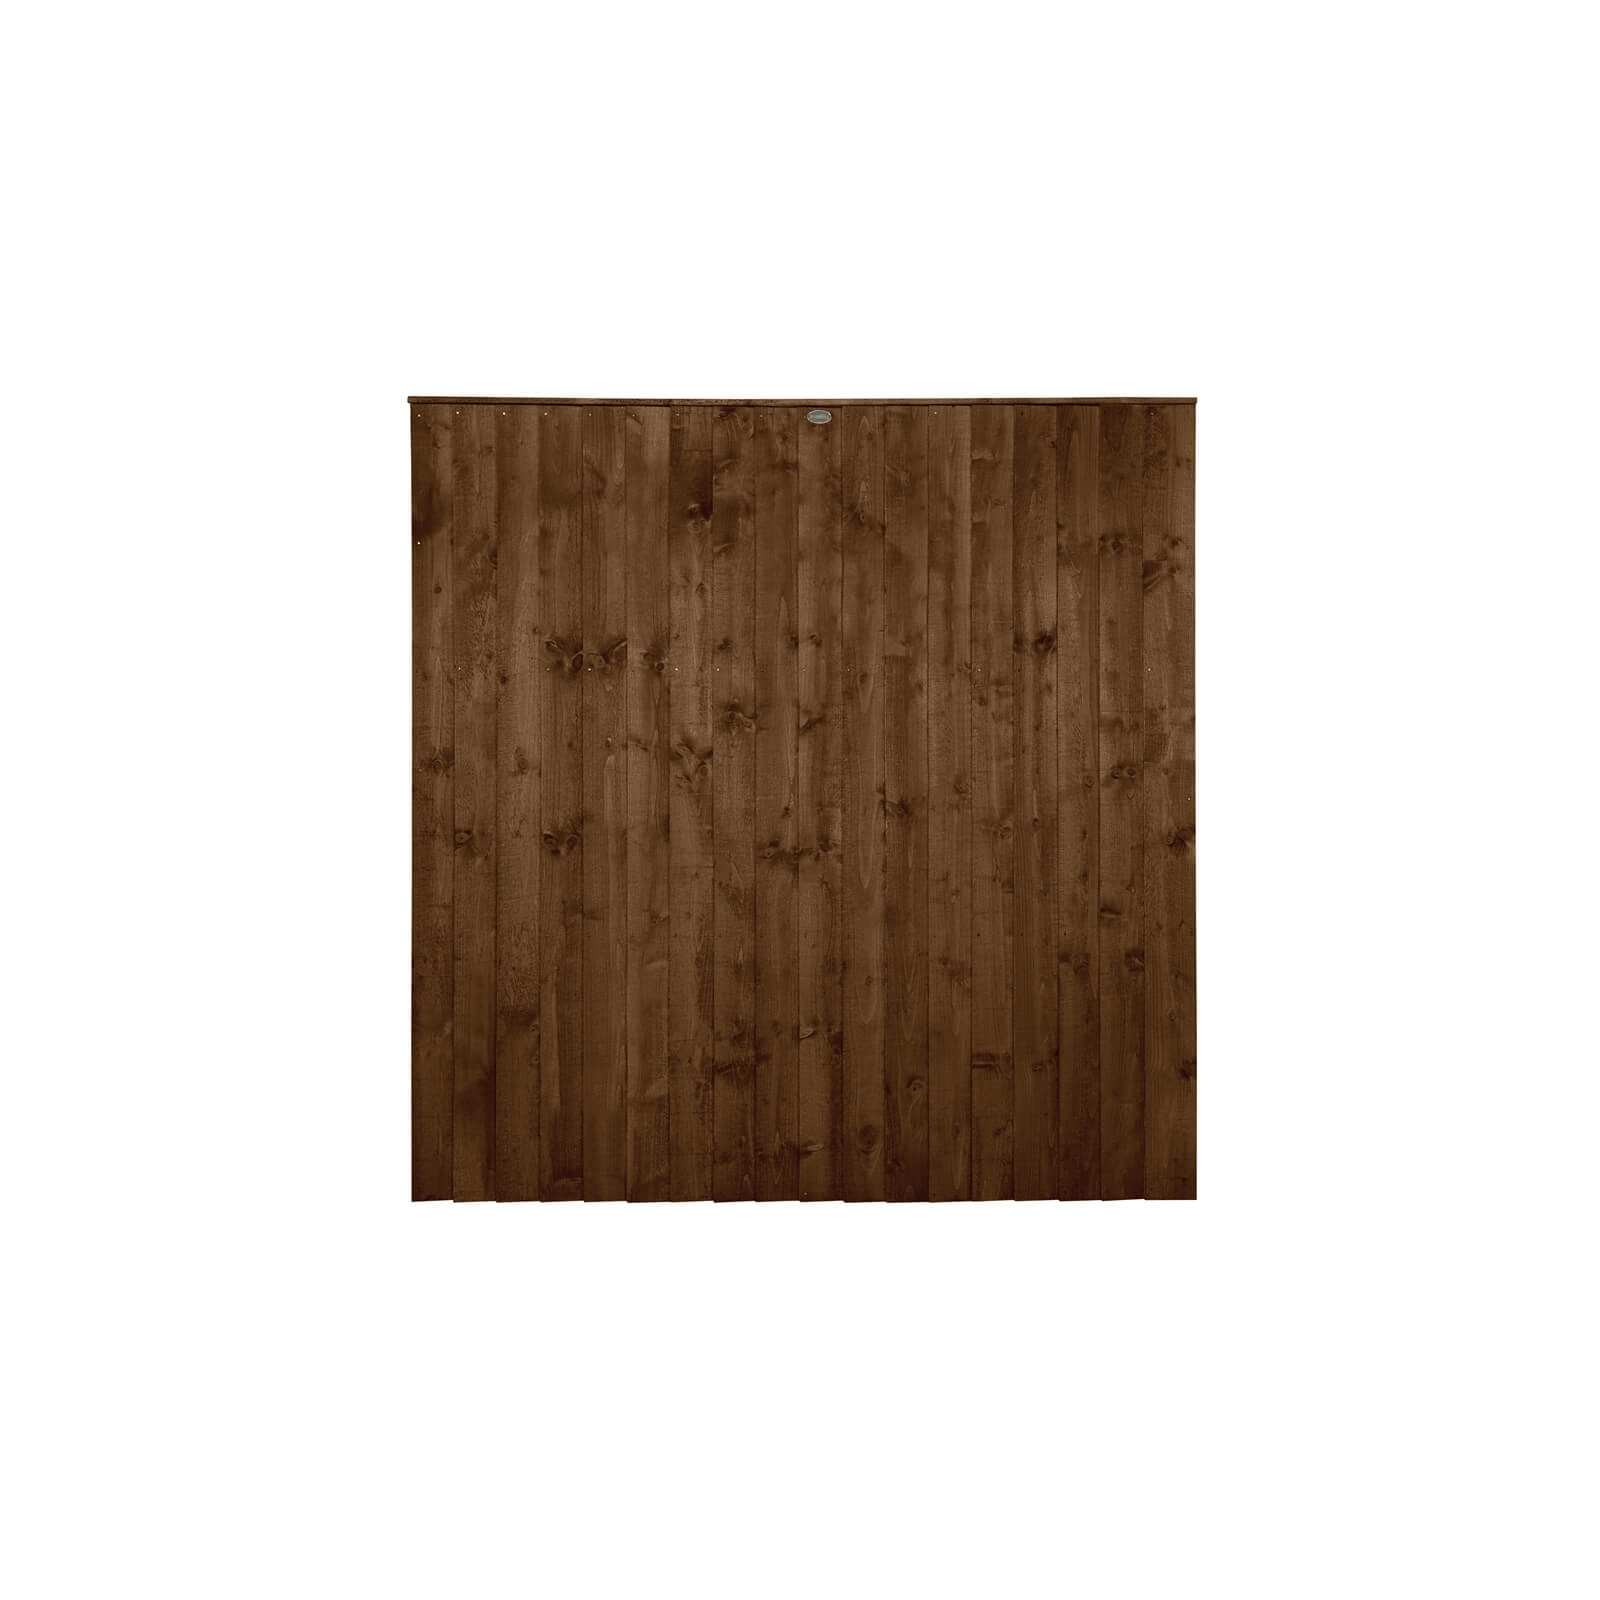 6ft x 6ft (1.83m x 1.85m) Pressure Treated Featheredge Fence Panel (Dark Brown) - Pack of 3